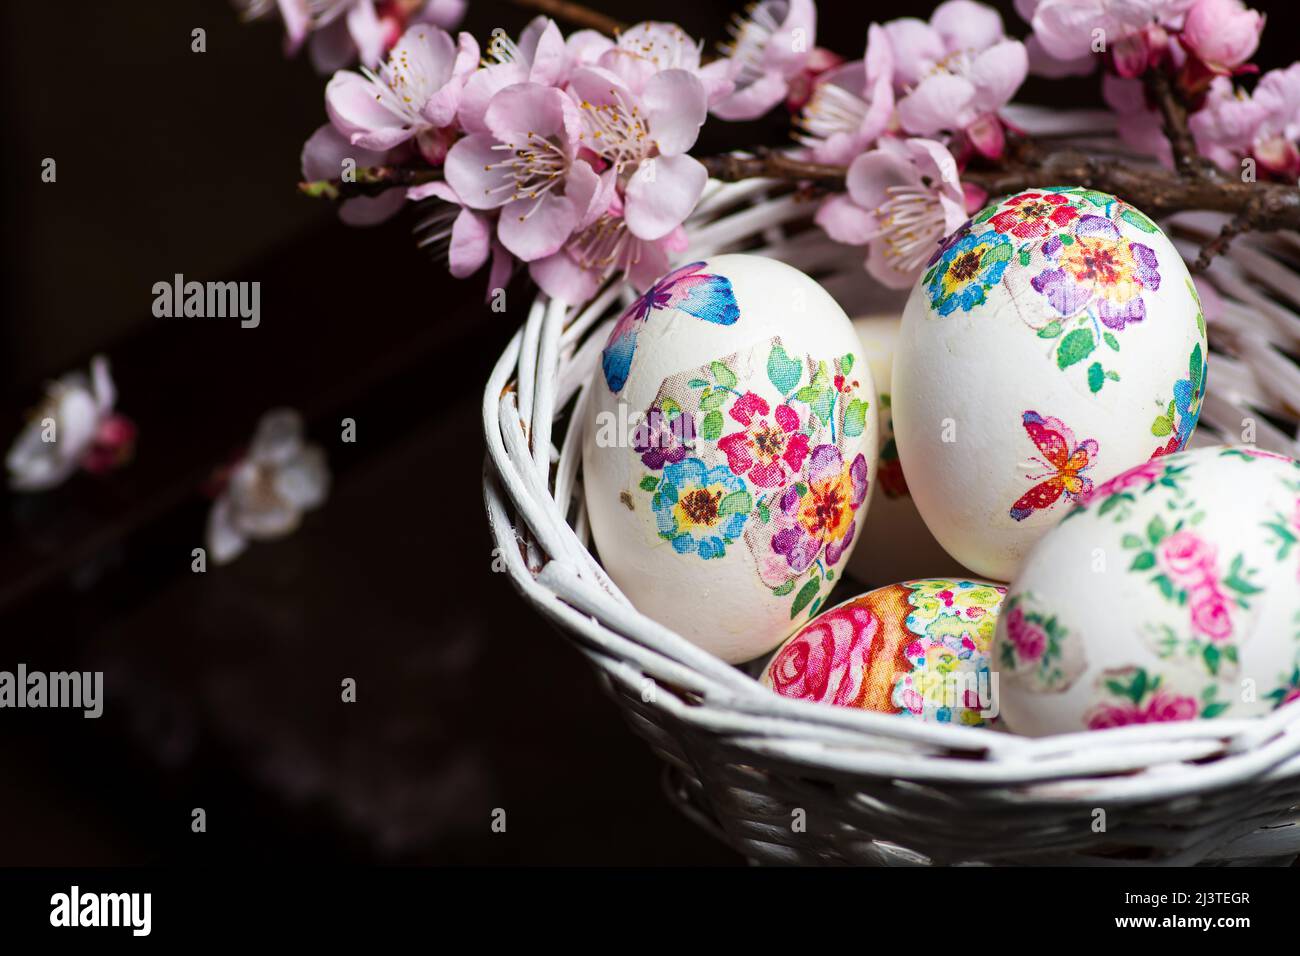 White Easter eggs made with decoupage technique with floral motifs and a flowering branch on a black rustic background. Stock Photo